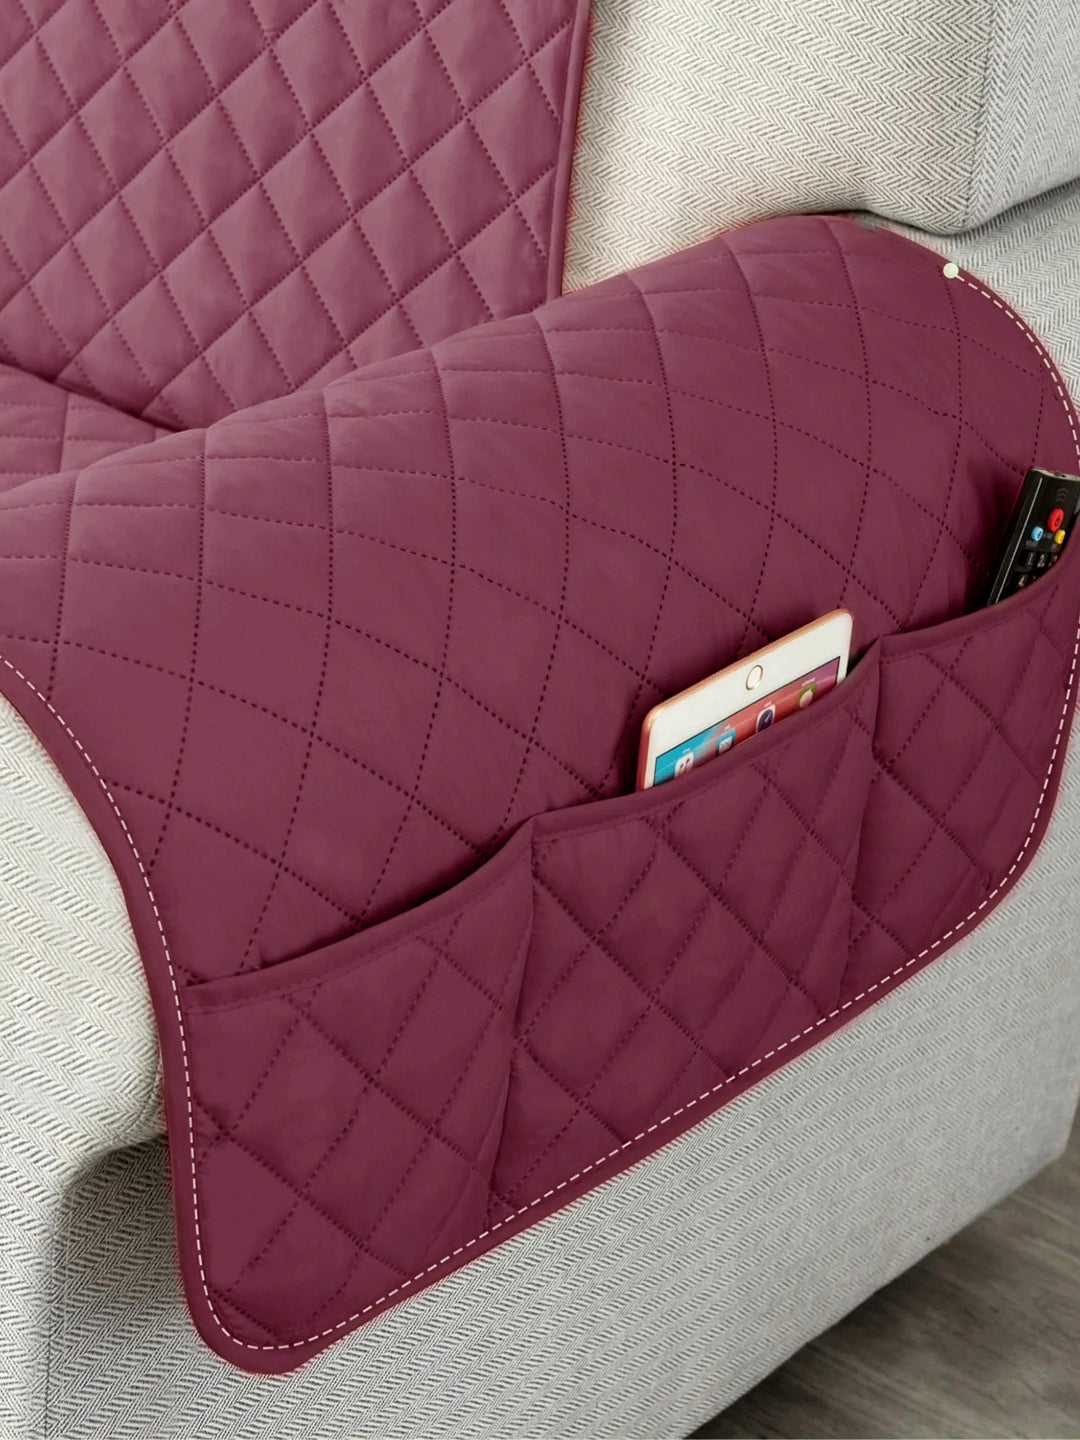 Reversible Quilted Polyester Solid Sofa Cover 1 Seater- Maroon & Grey